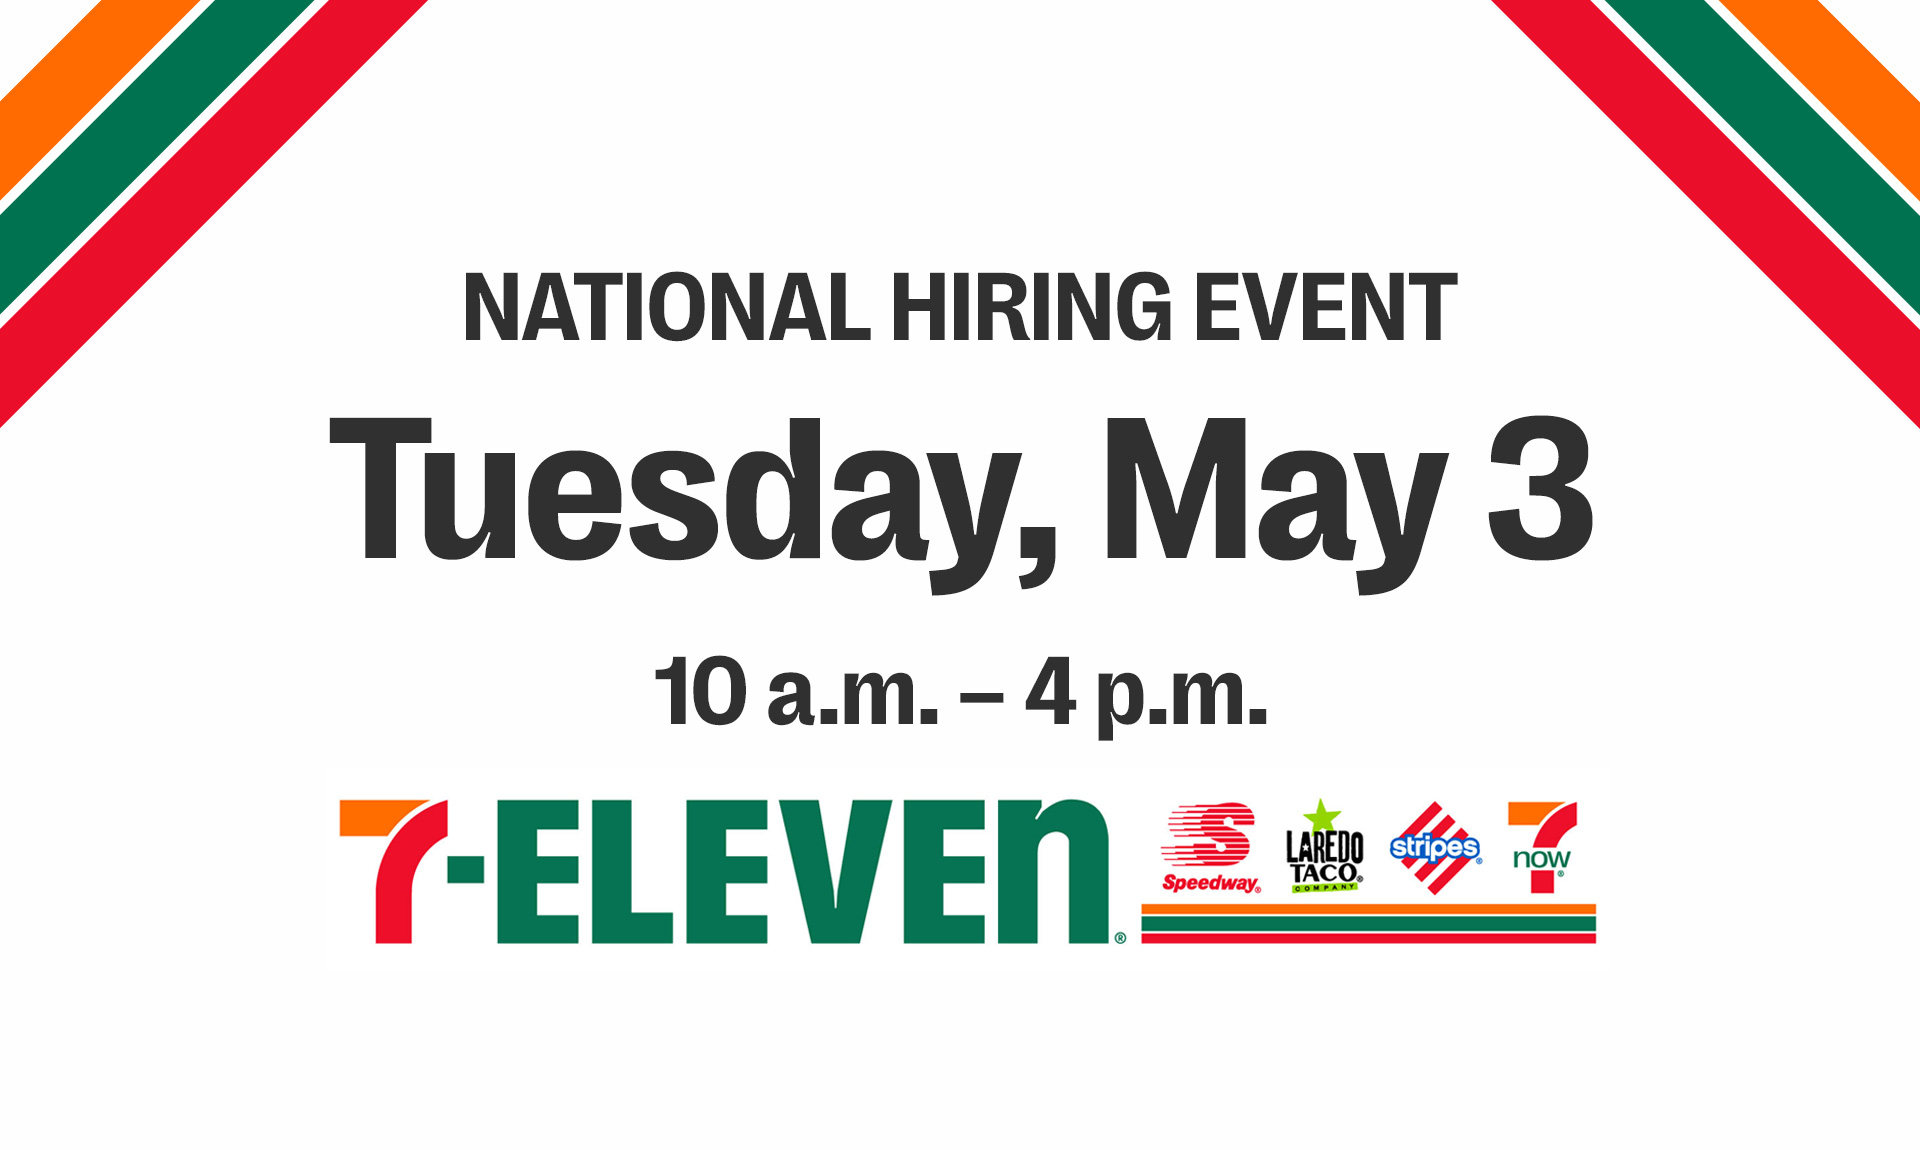 7Eleven, Speedway, Stripes Announce Plan to Fill 60,000 Roles on